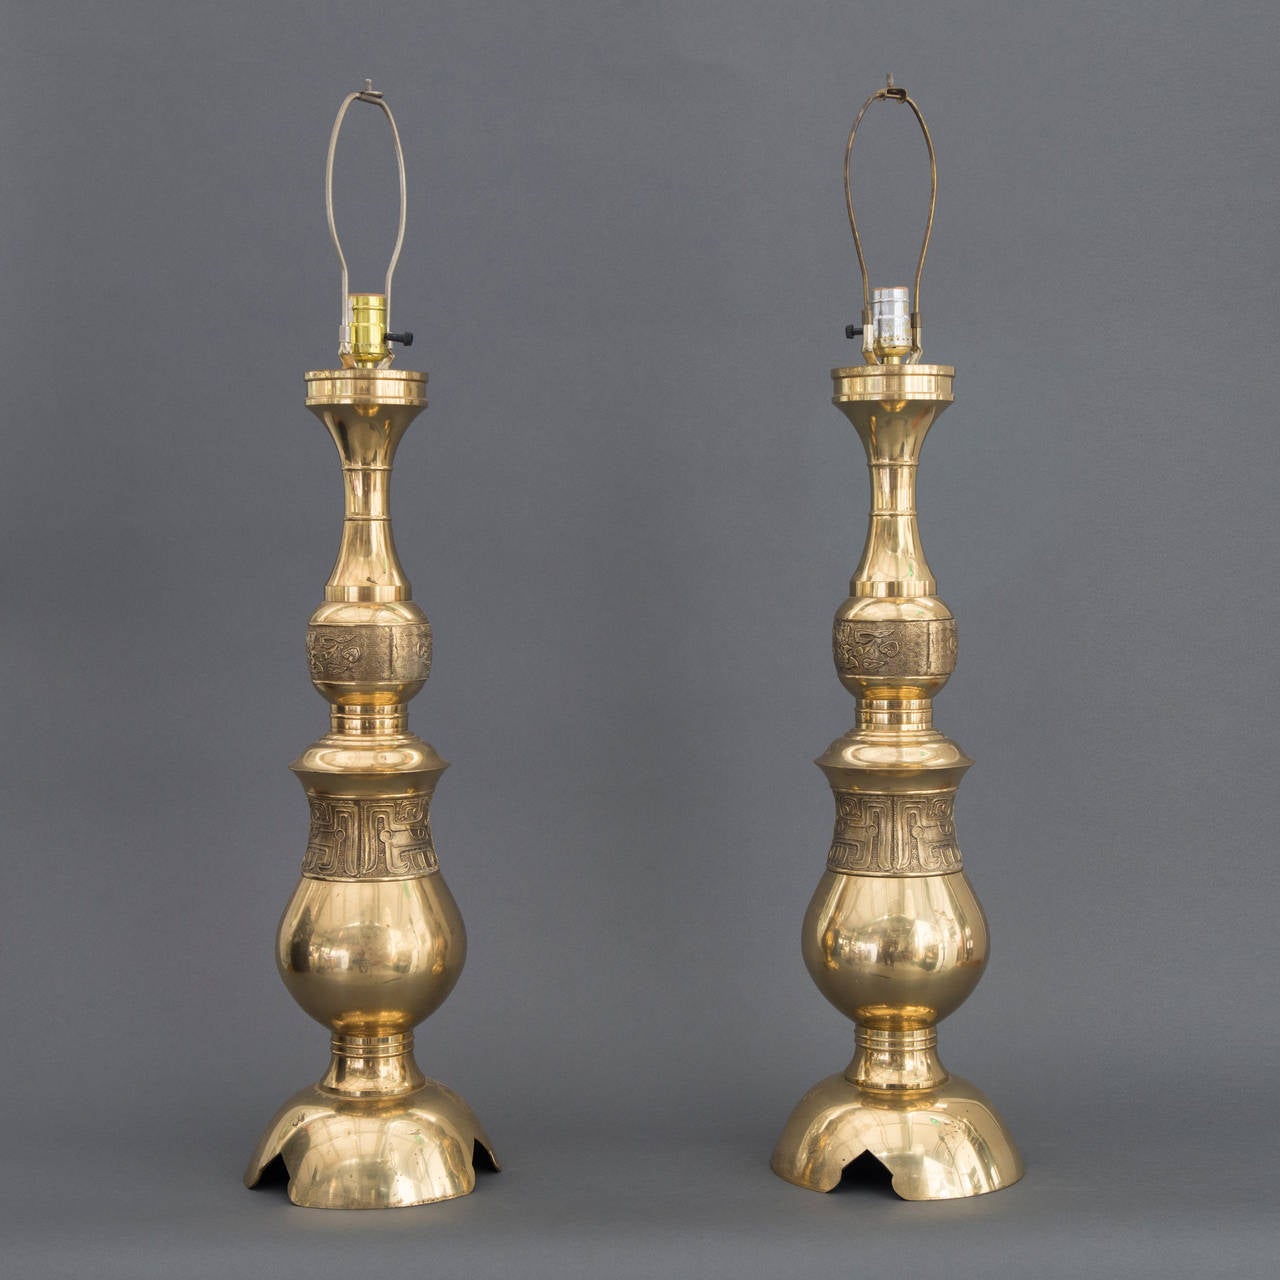 Offered is a pair of Mid-Century Modern James Mont chinoiserie style engraved brass monumental table lamps. This iconic pair has probably appeared in hundreds of Hollywood movie and television sets during the mid-20th century. These 